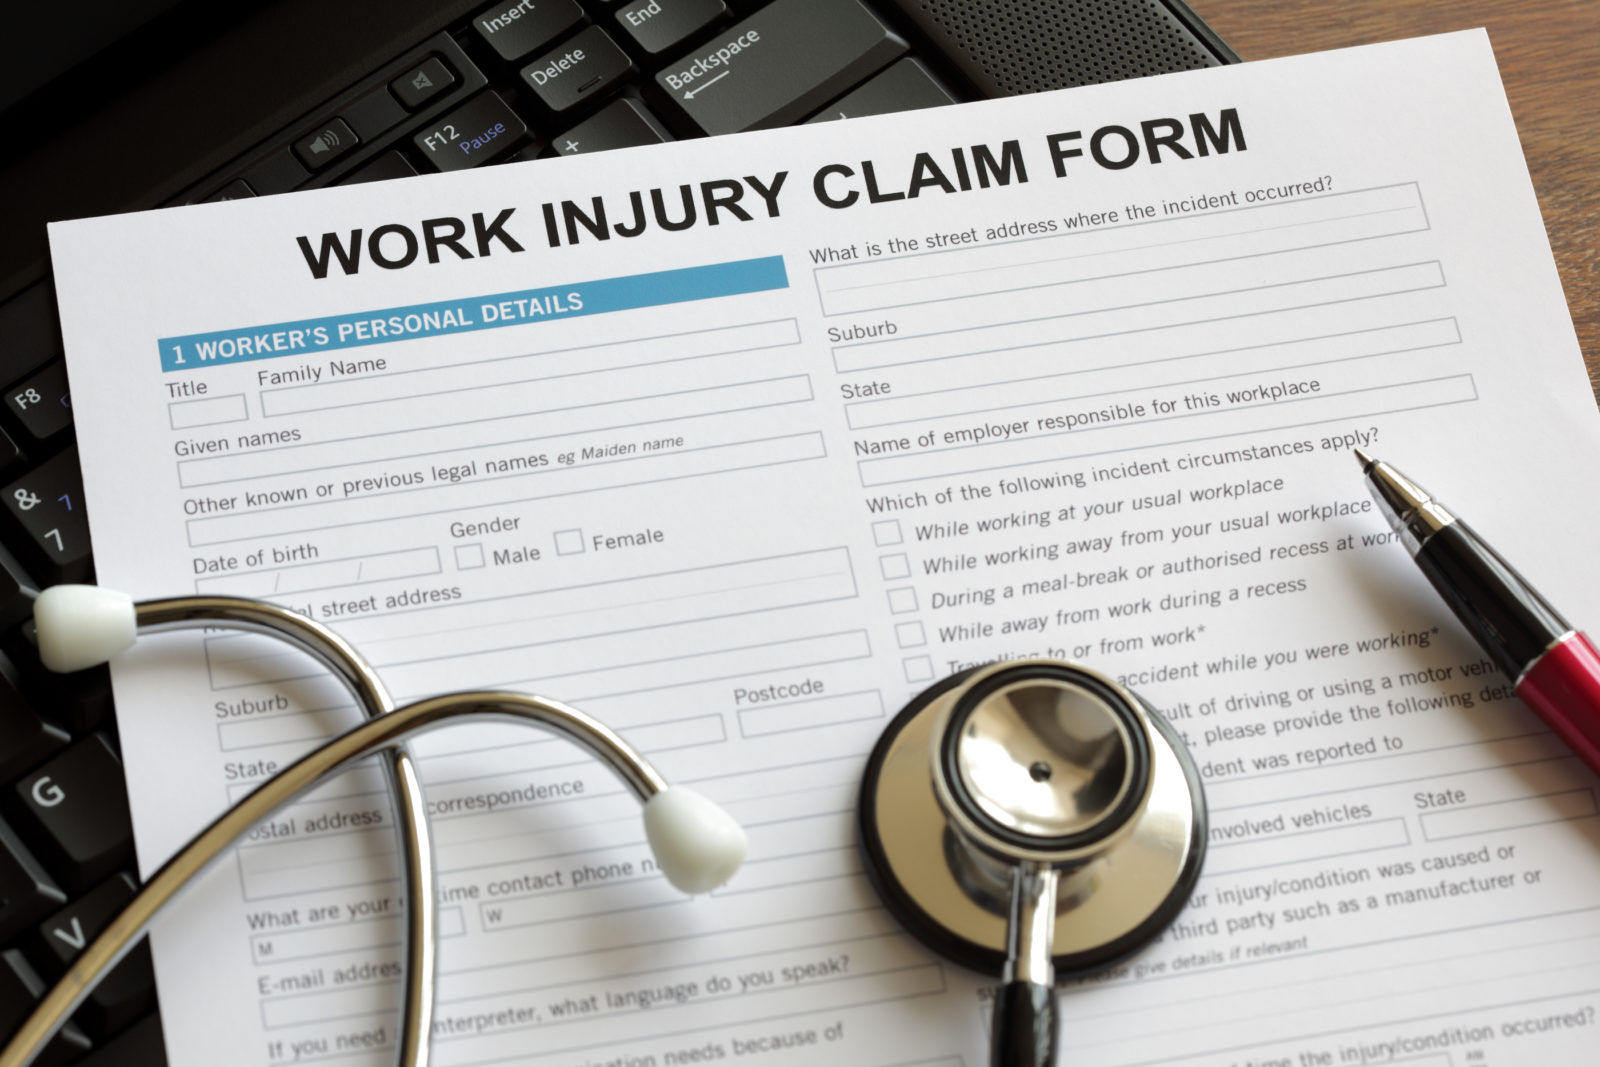 St. Paul Workers' Compensation